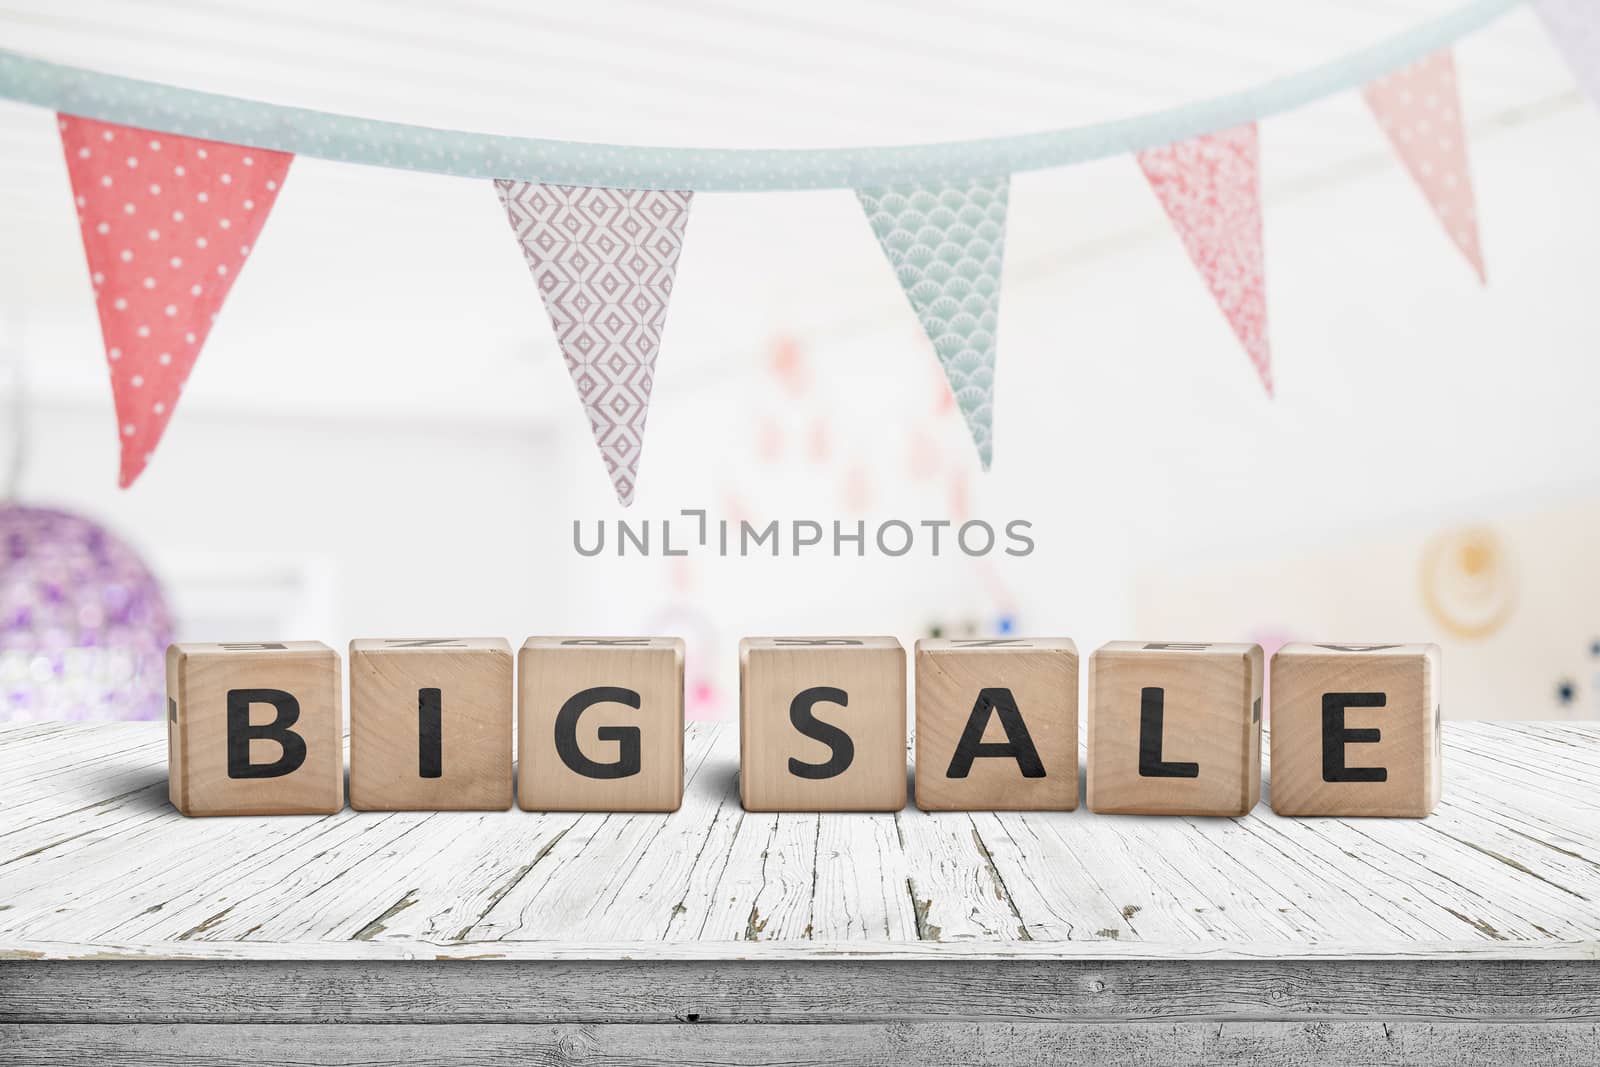 Big sale sign on a white table with festive flags hanging above